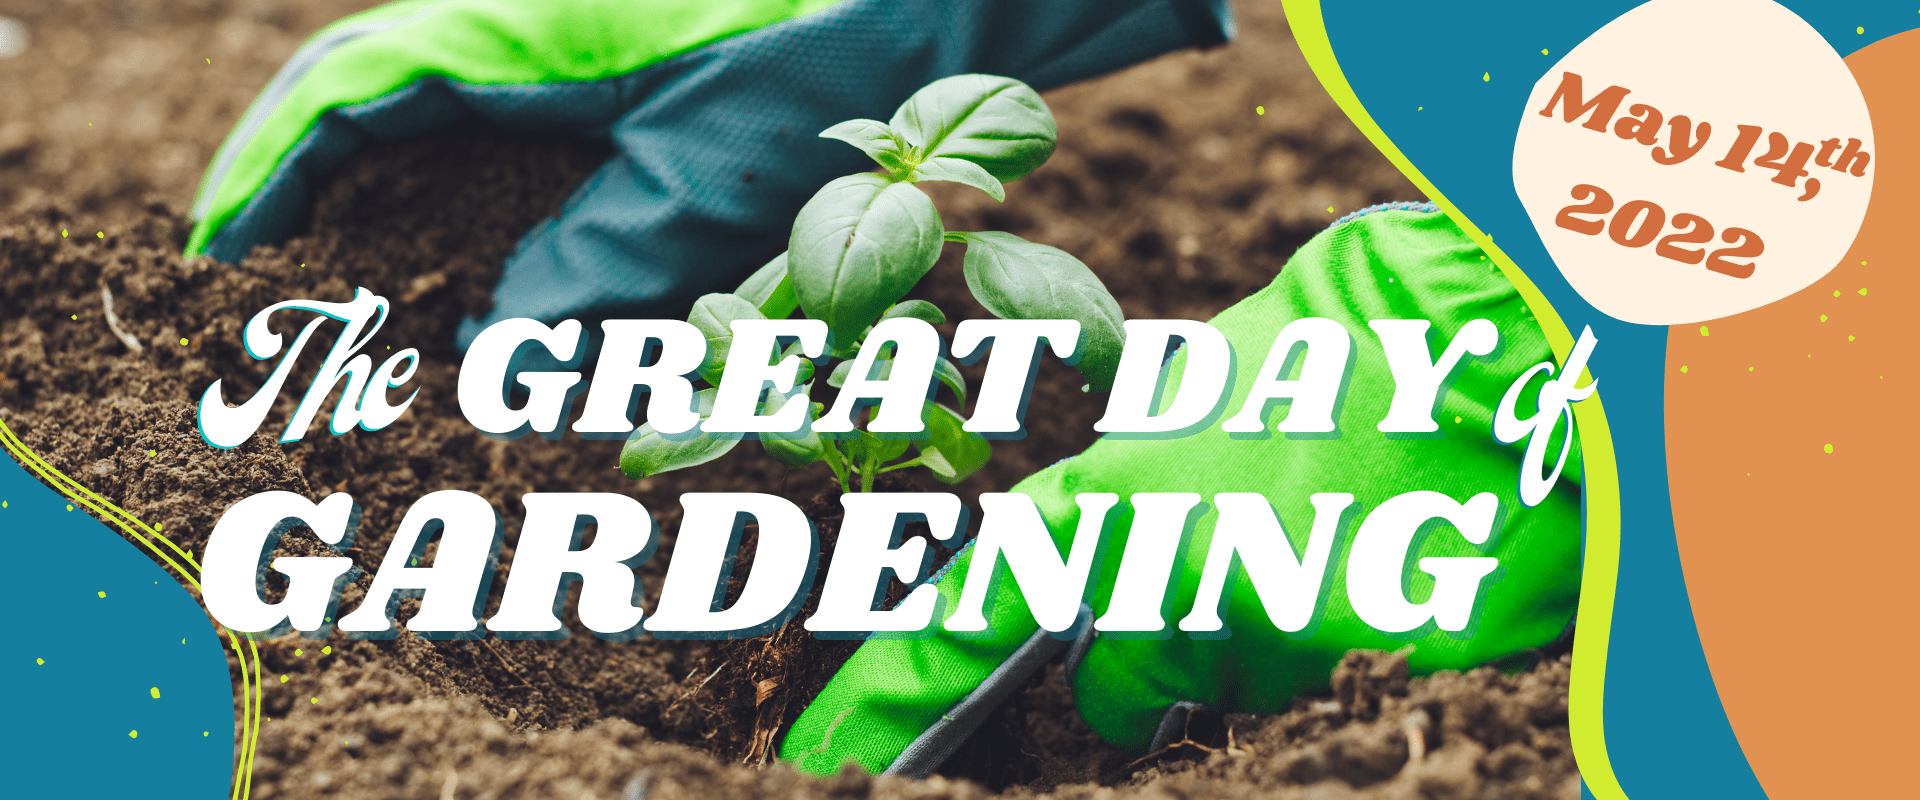 The Great Day of Gardening